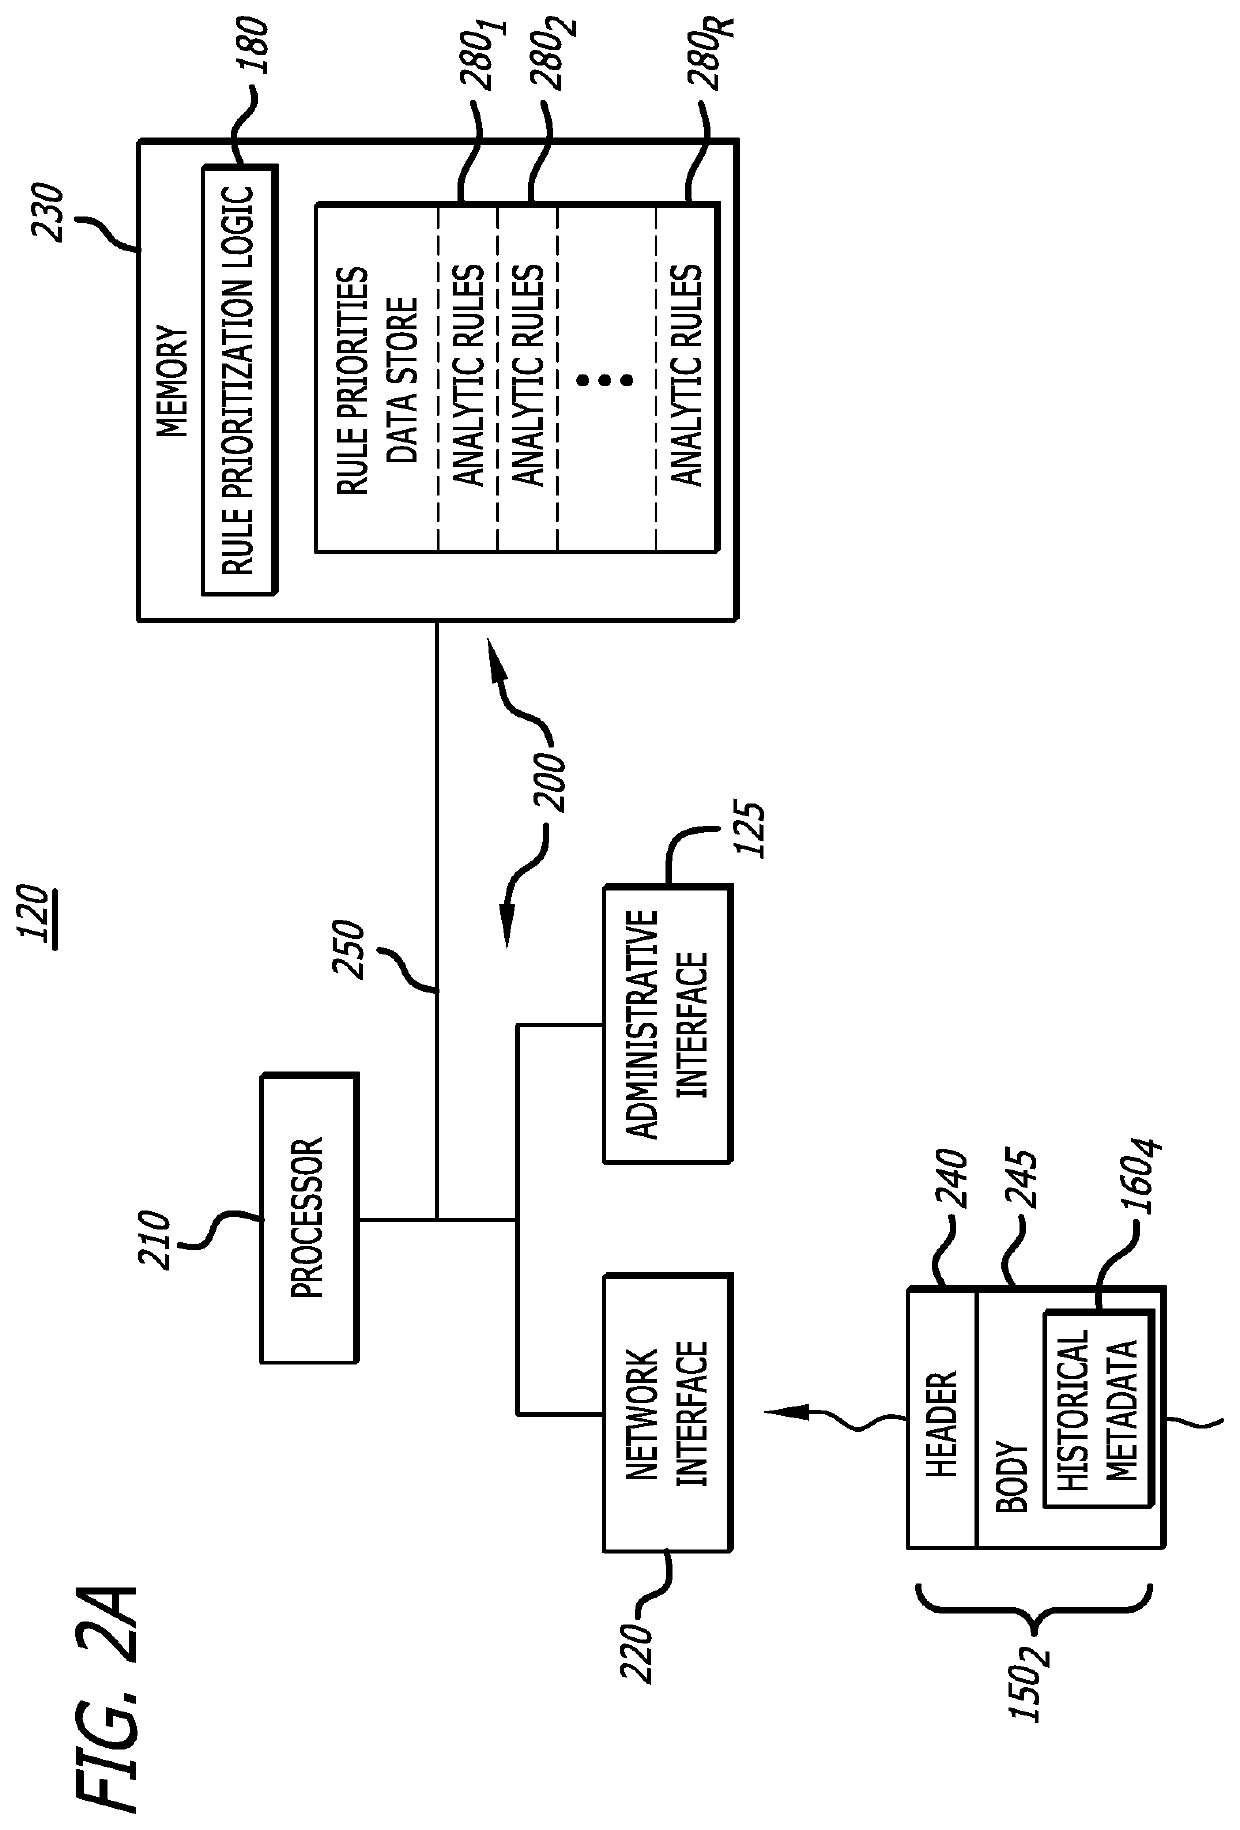 System and method for automatically prioritizing rules for cyber-threat detection and mitigation